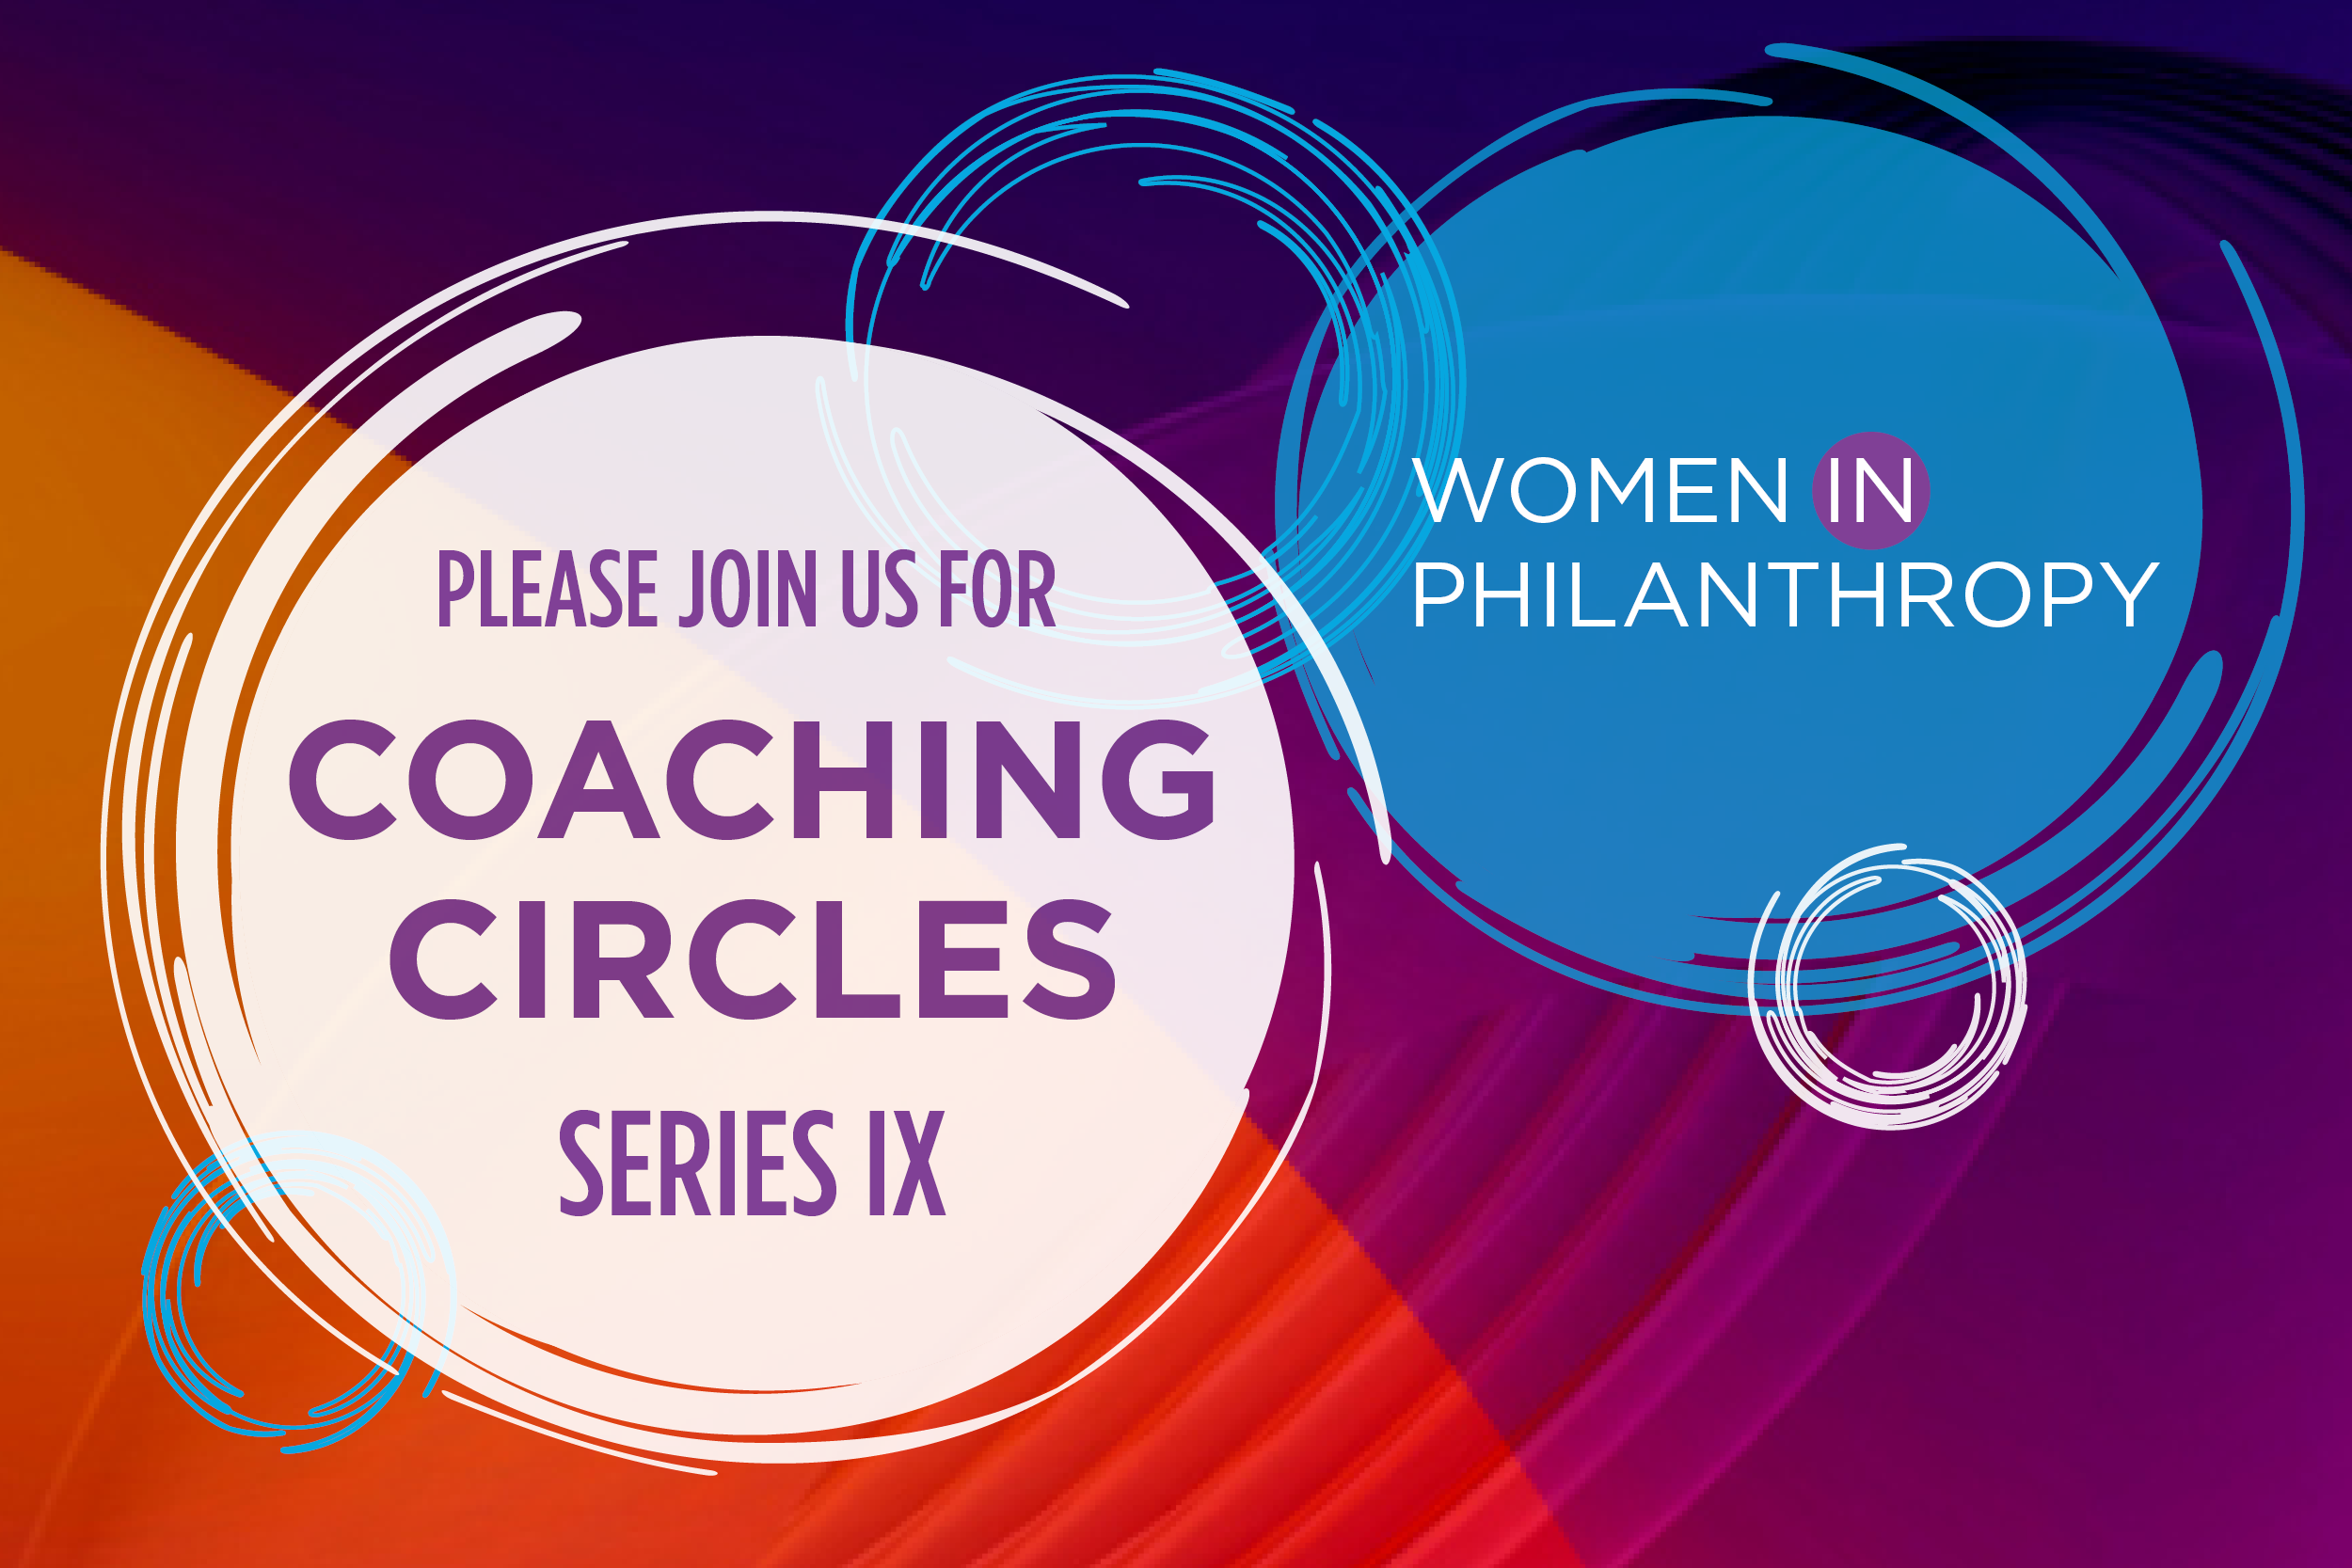 Apply for Coaching Circles: Series IV